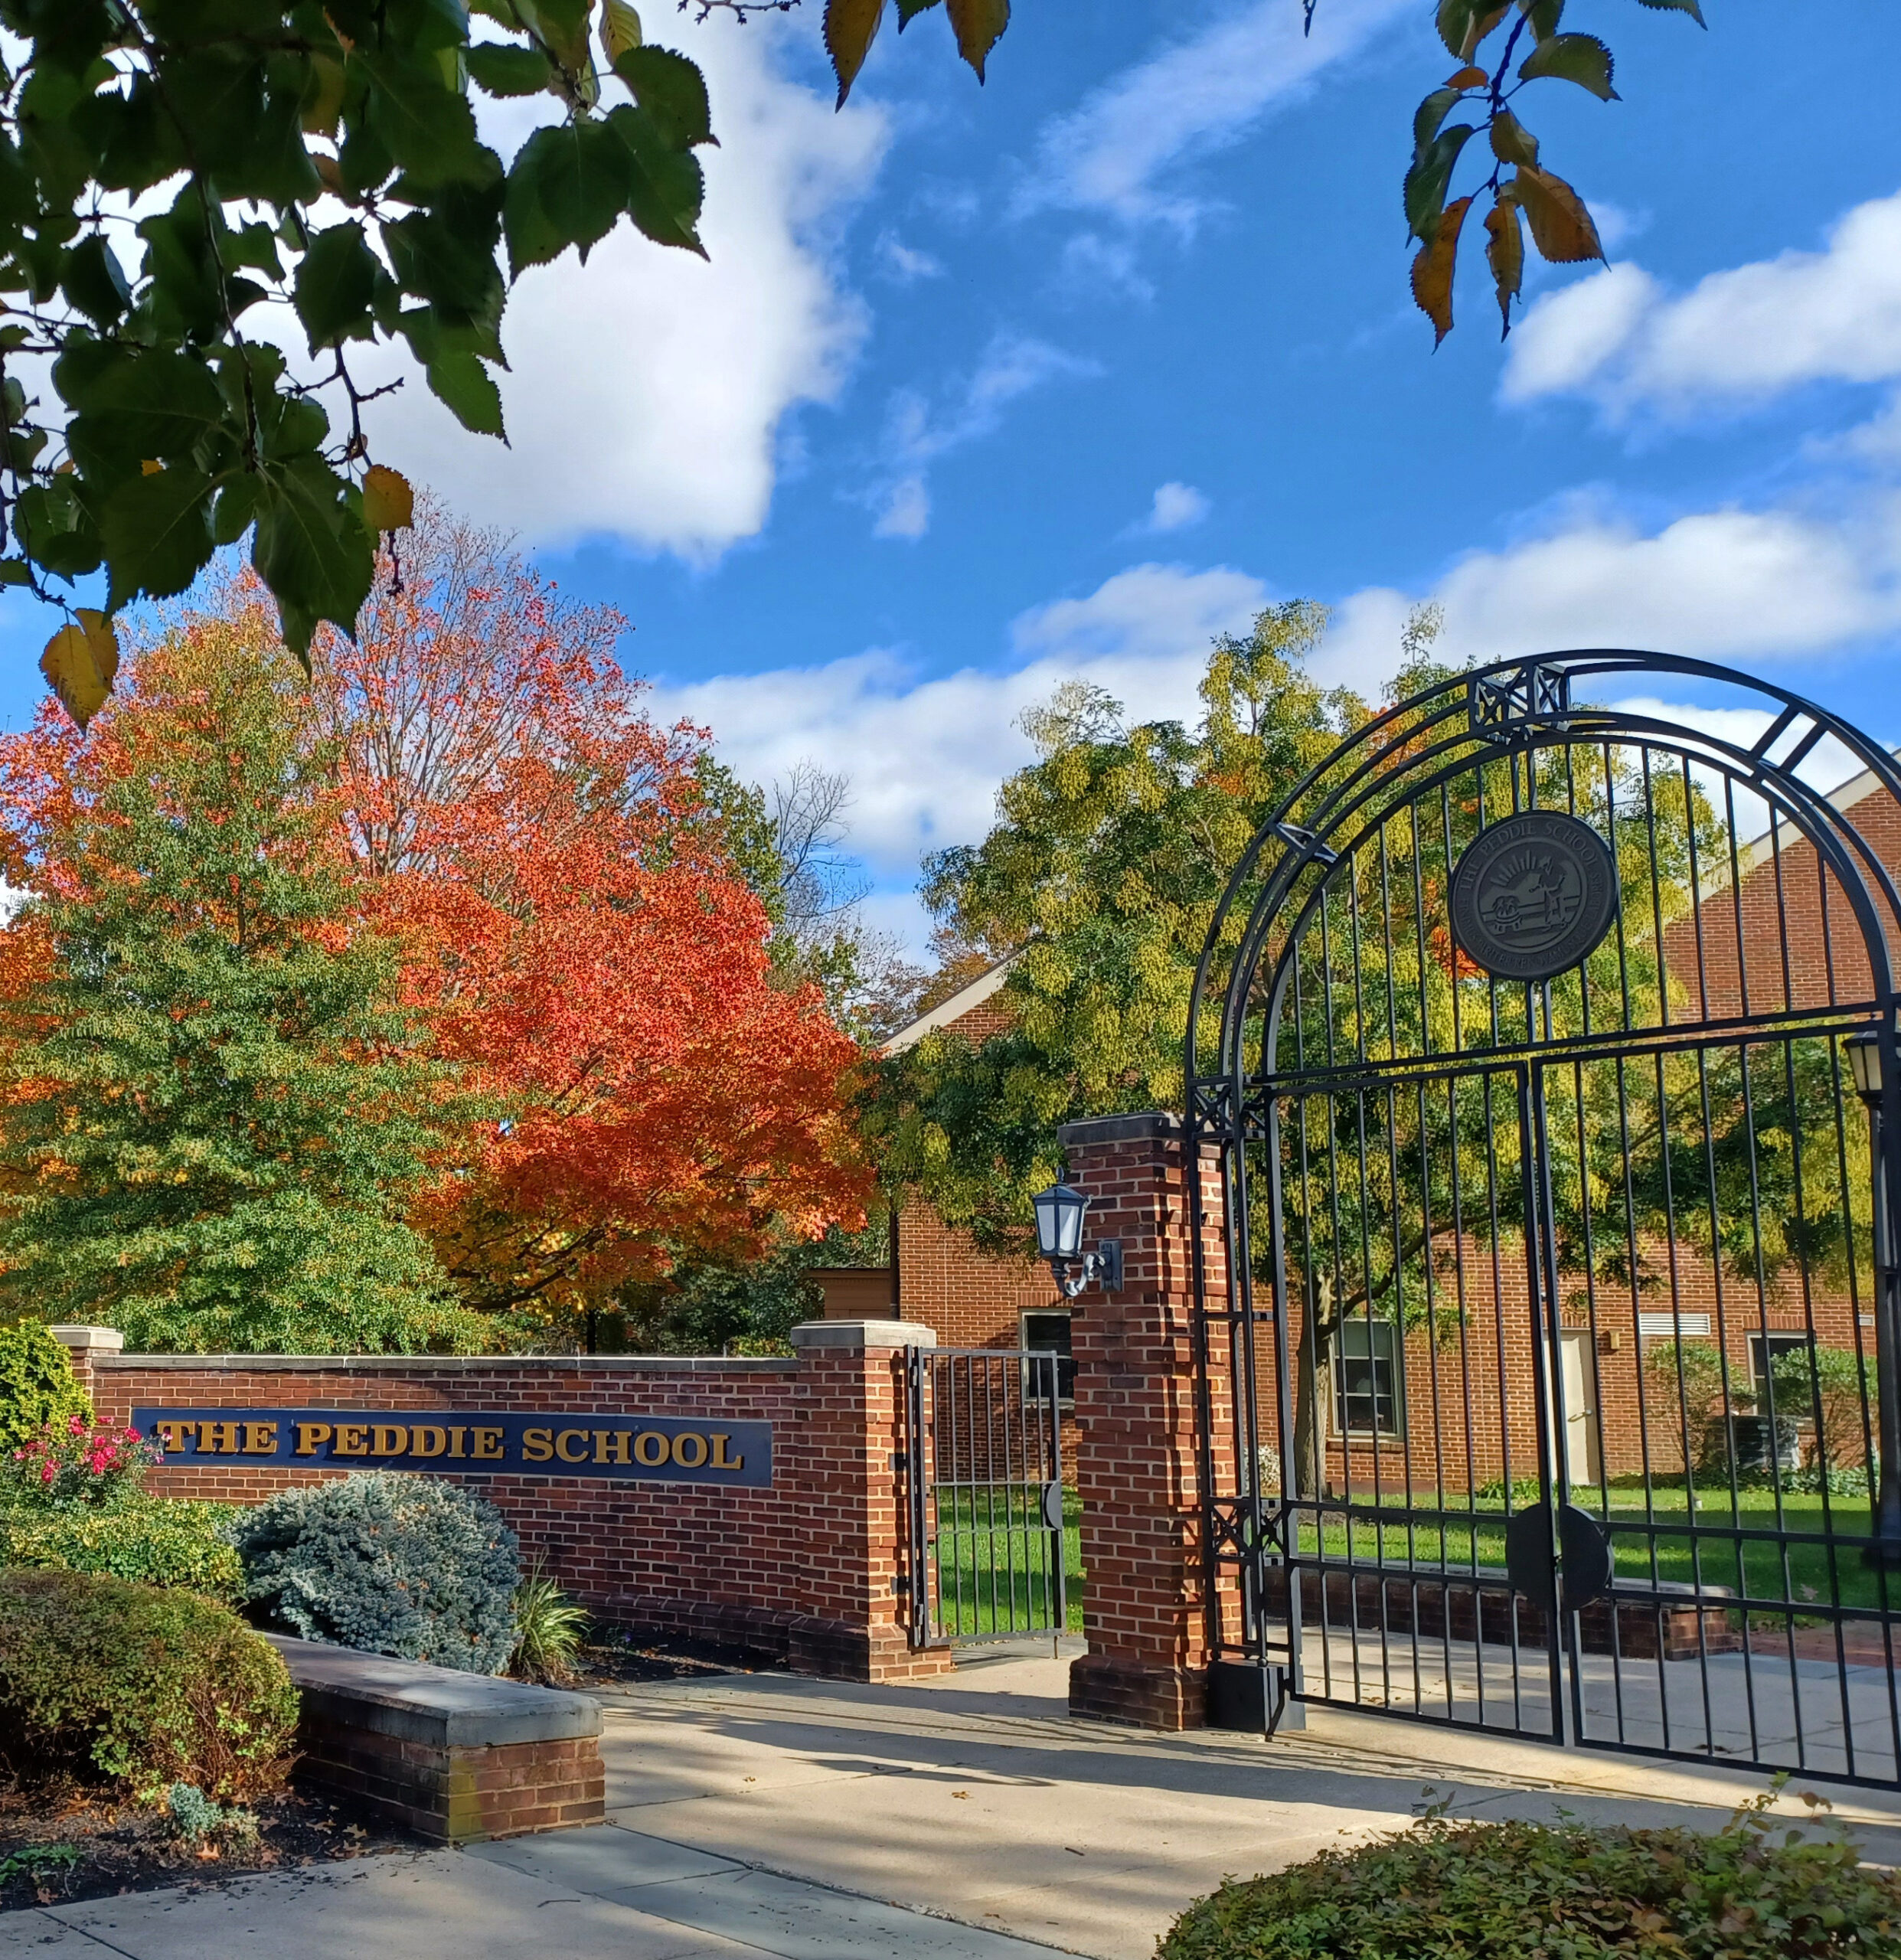 The Peddie School gates with bright colored fall foliage